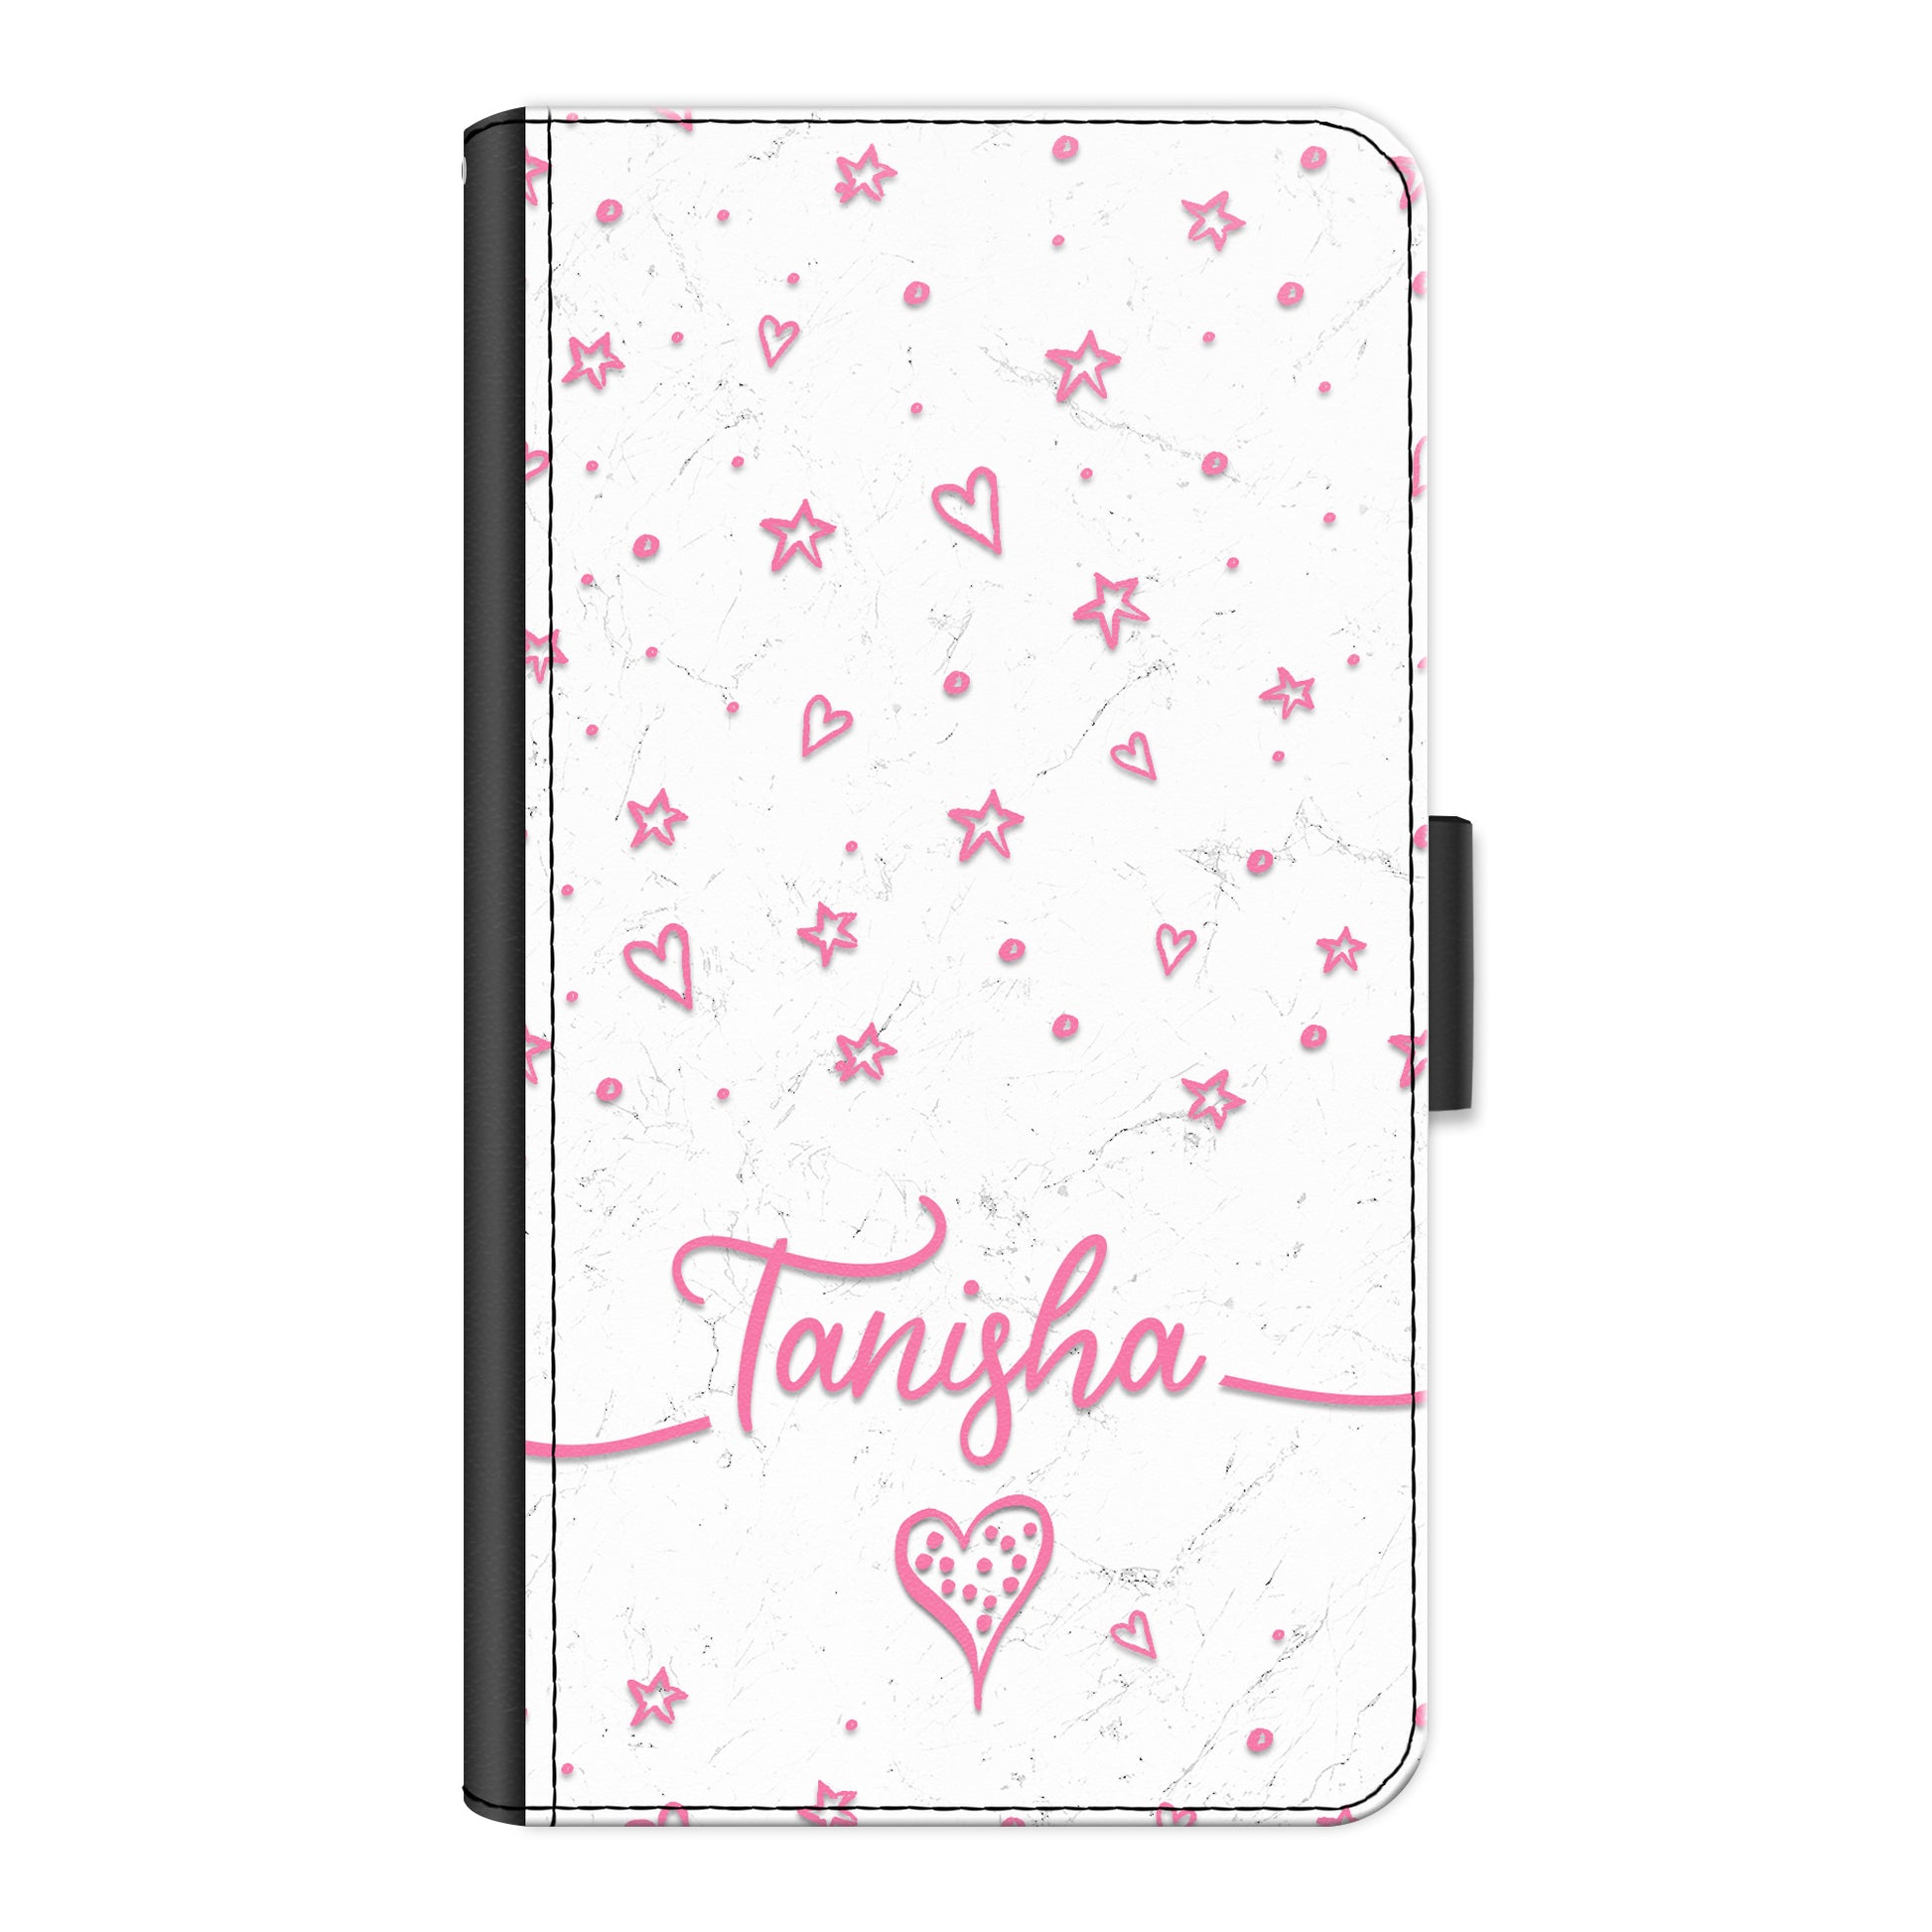 Personalised LG Phone Leather Wallet with Pink Stylish text, Stars and Hearts on White Marble